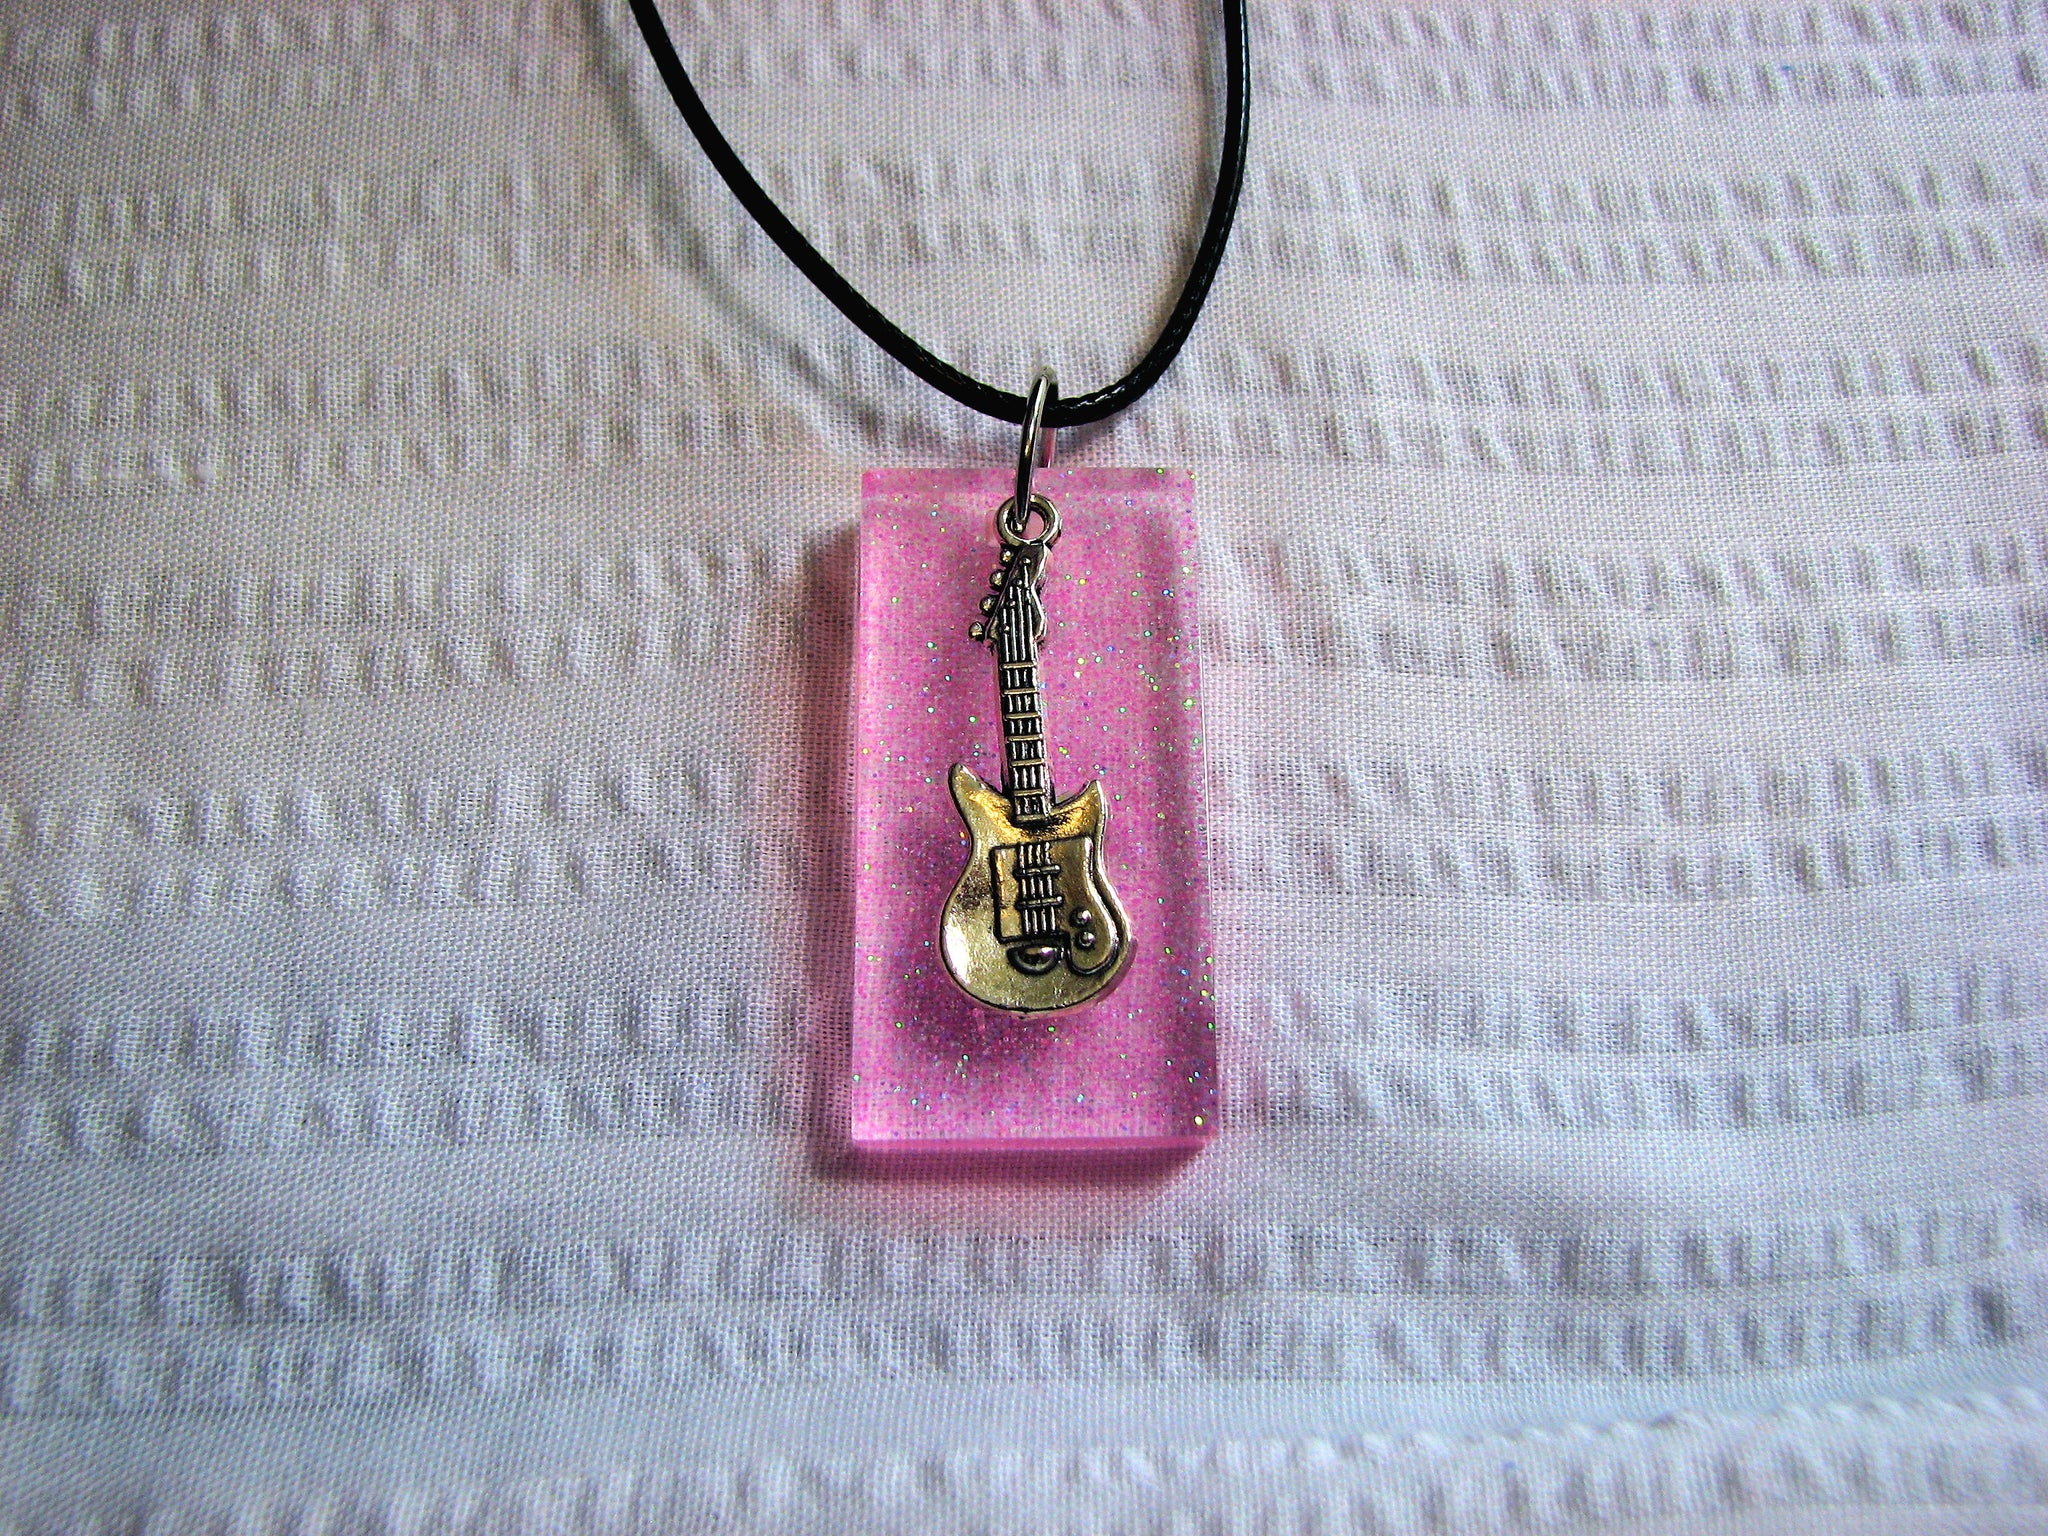 Rockstar Resin and Charm Necklace